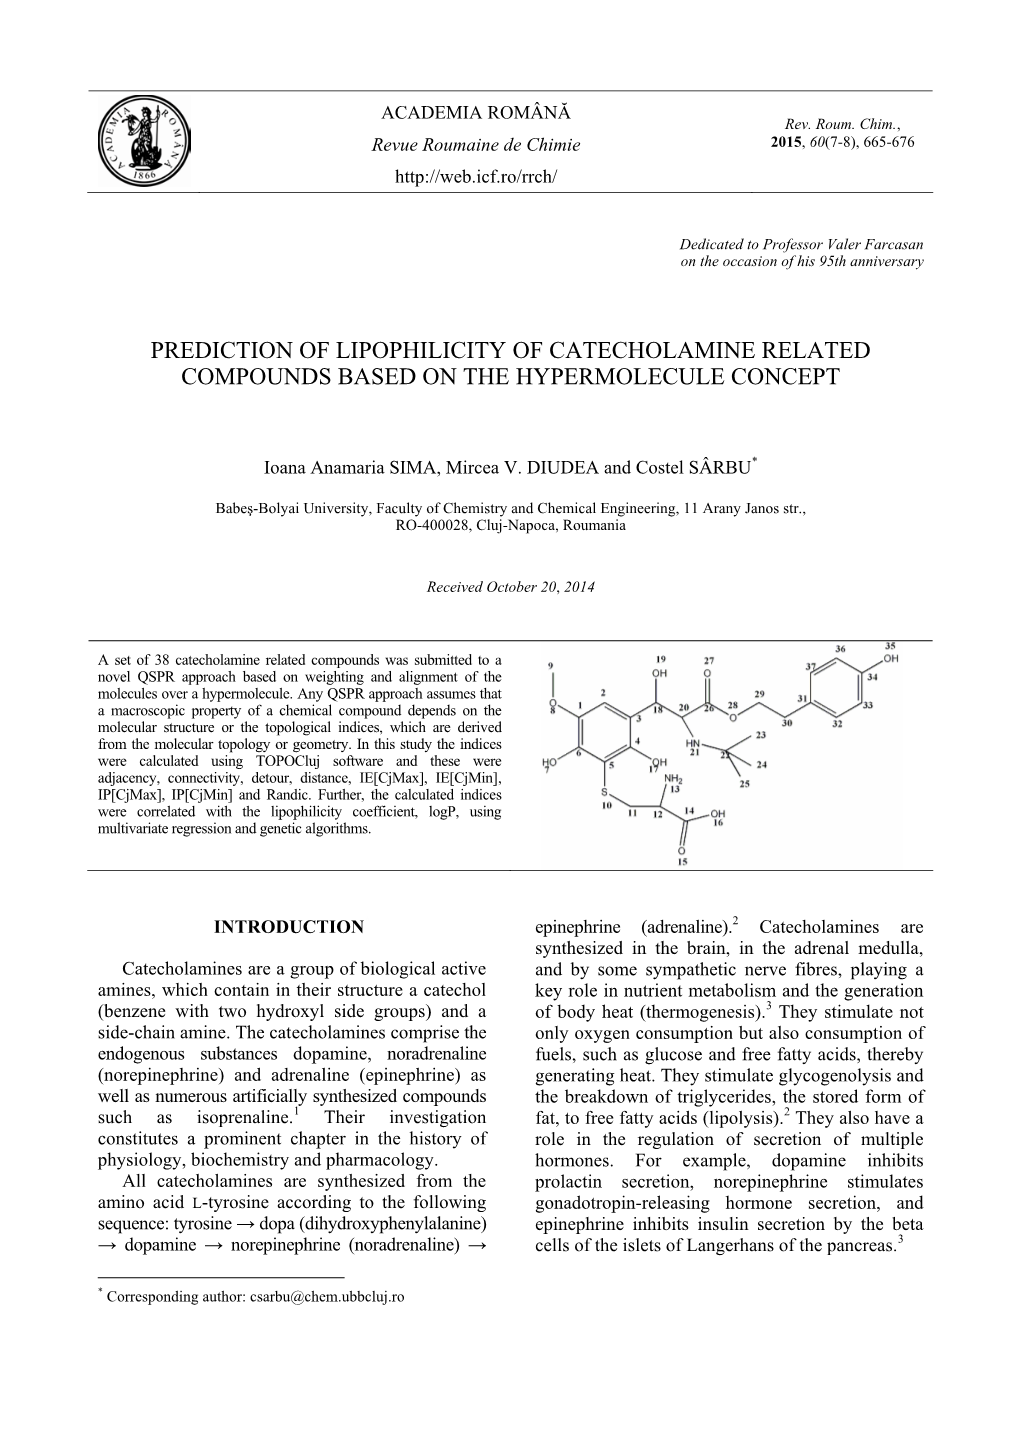 Prediction of Lipophilicity of Catecholamine Related Compounds Based on the Hypermolecule Concept